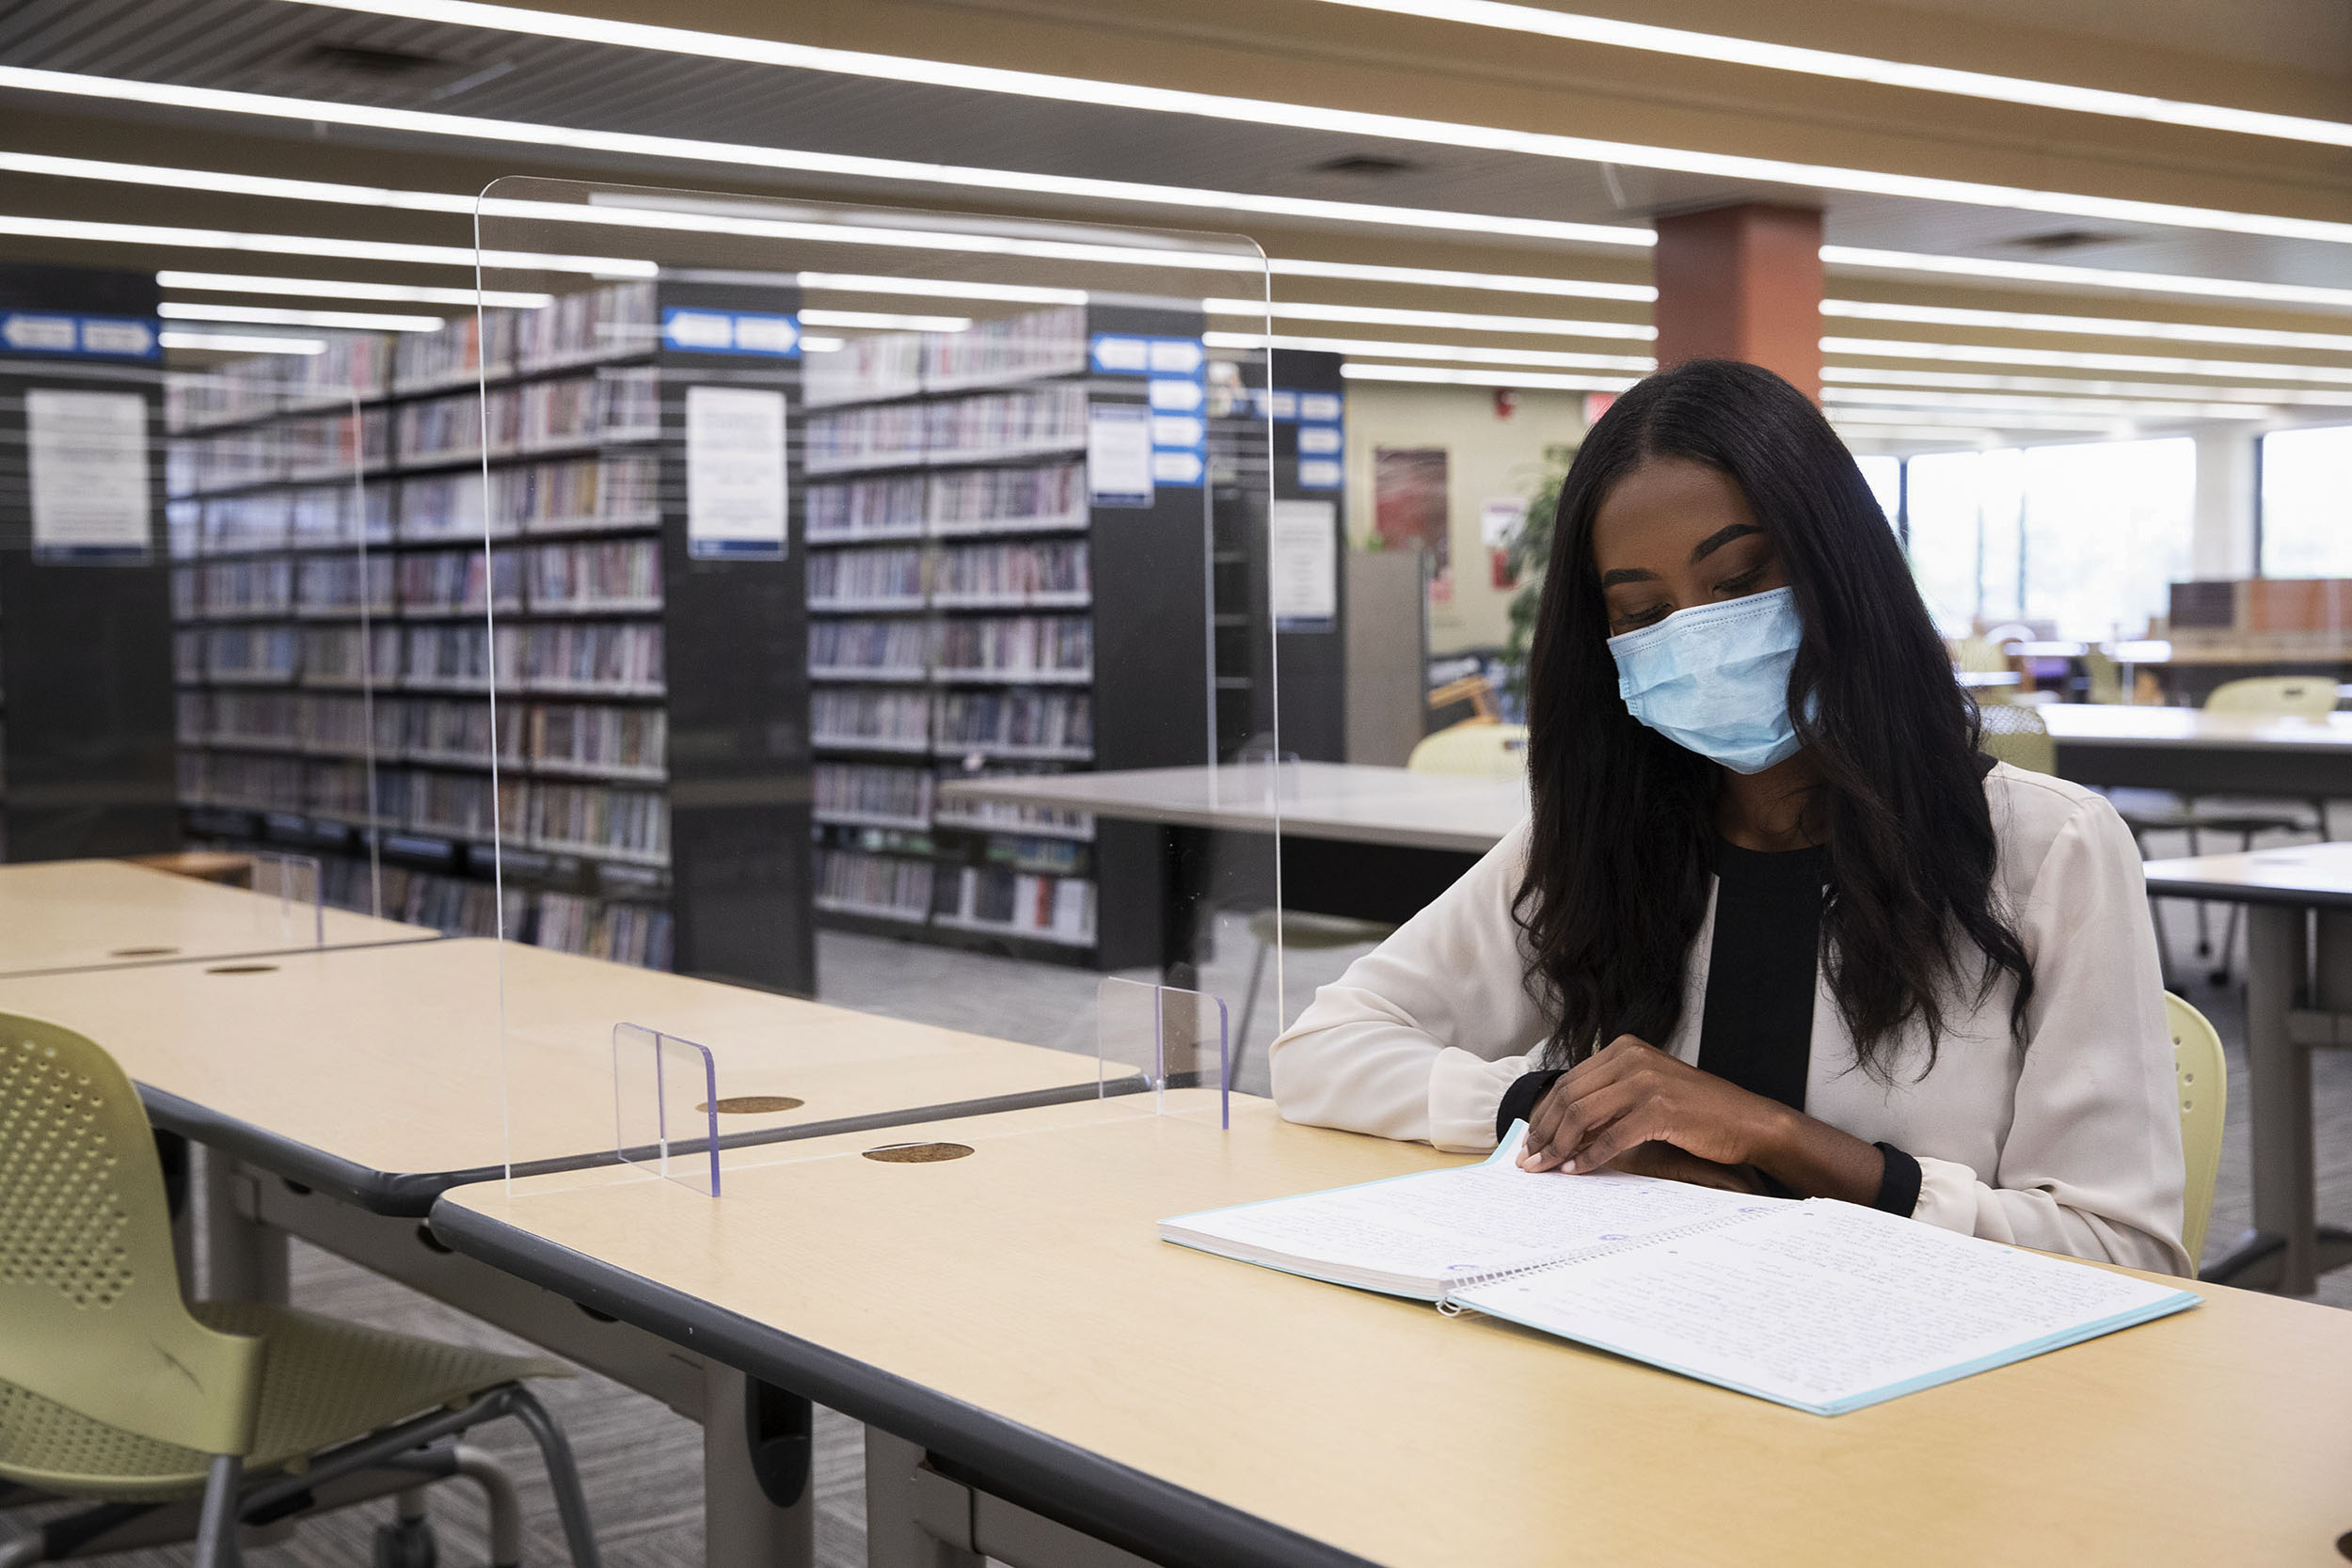 Rachel Jeffers studies in Clemons Library, which, along with the Charles L. Brown Science and Engineering Library, is open to students, with study spaces marked off by signs and clear plastic dividers.